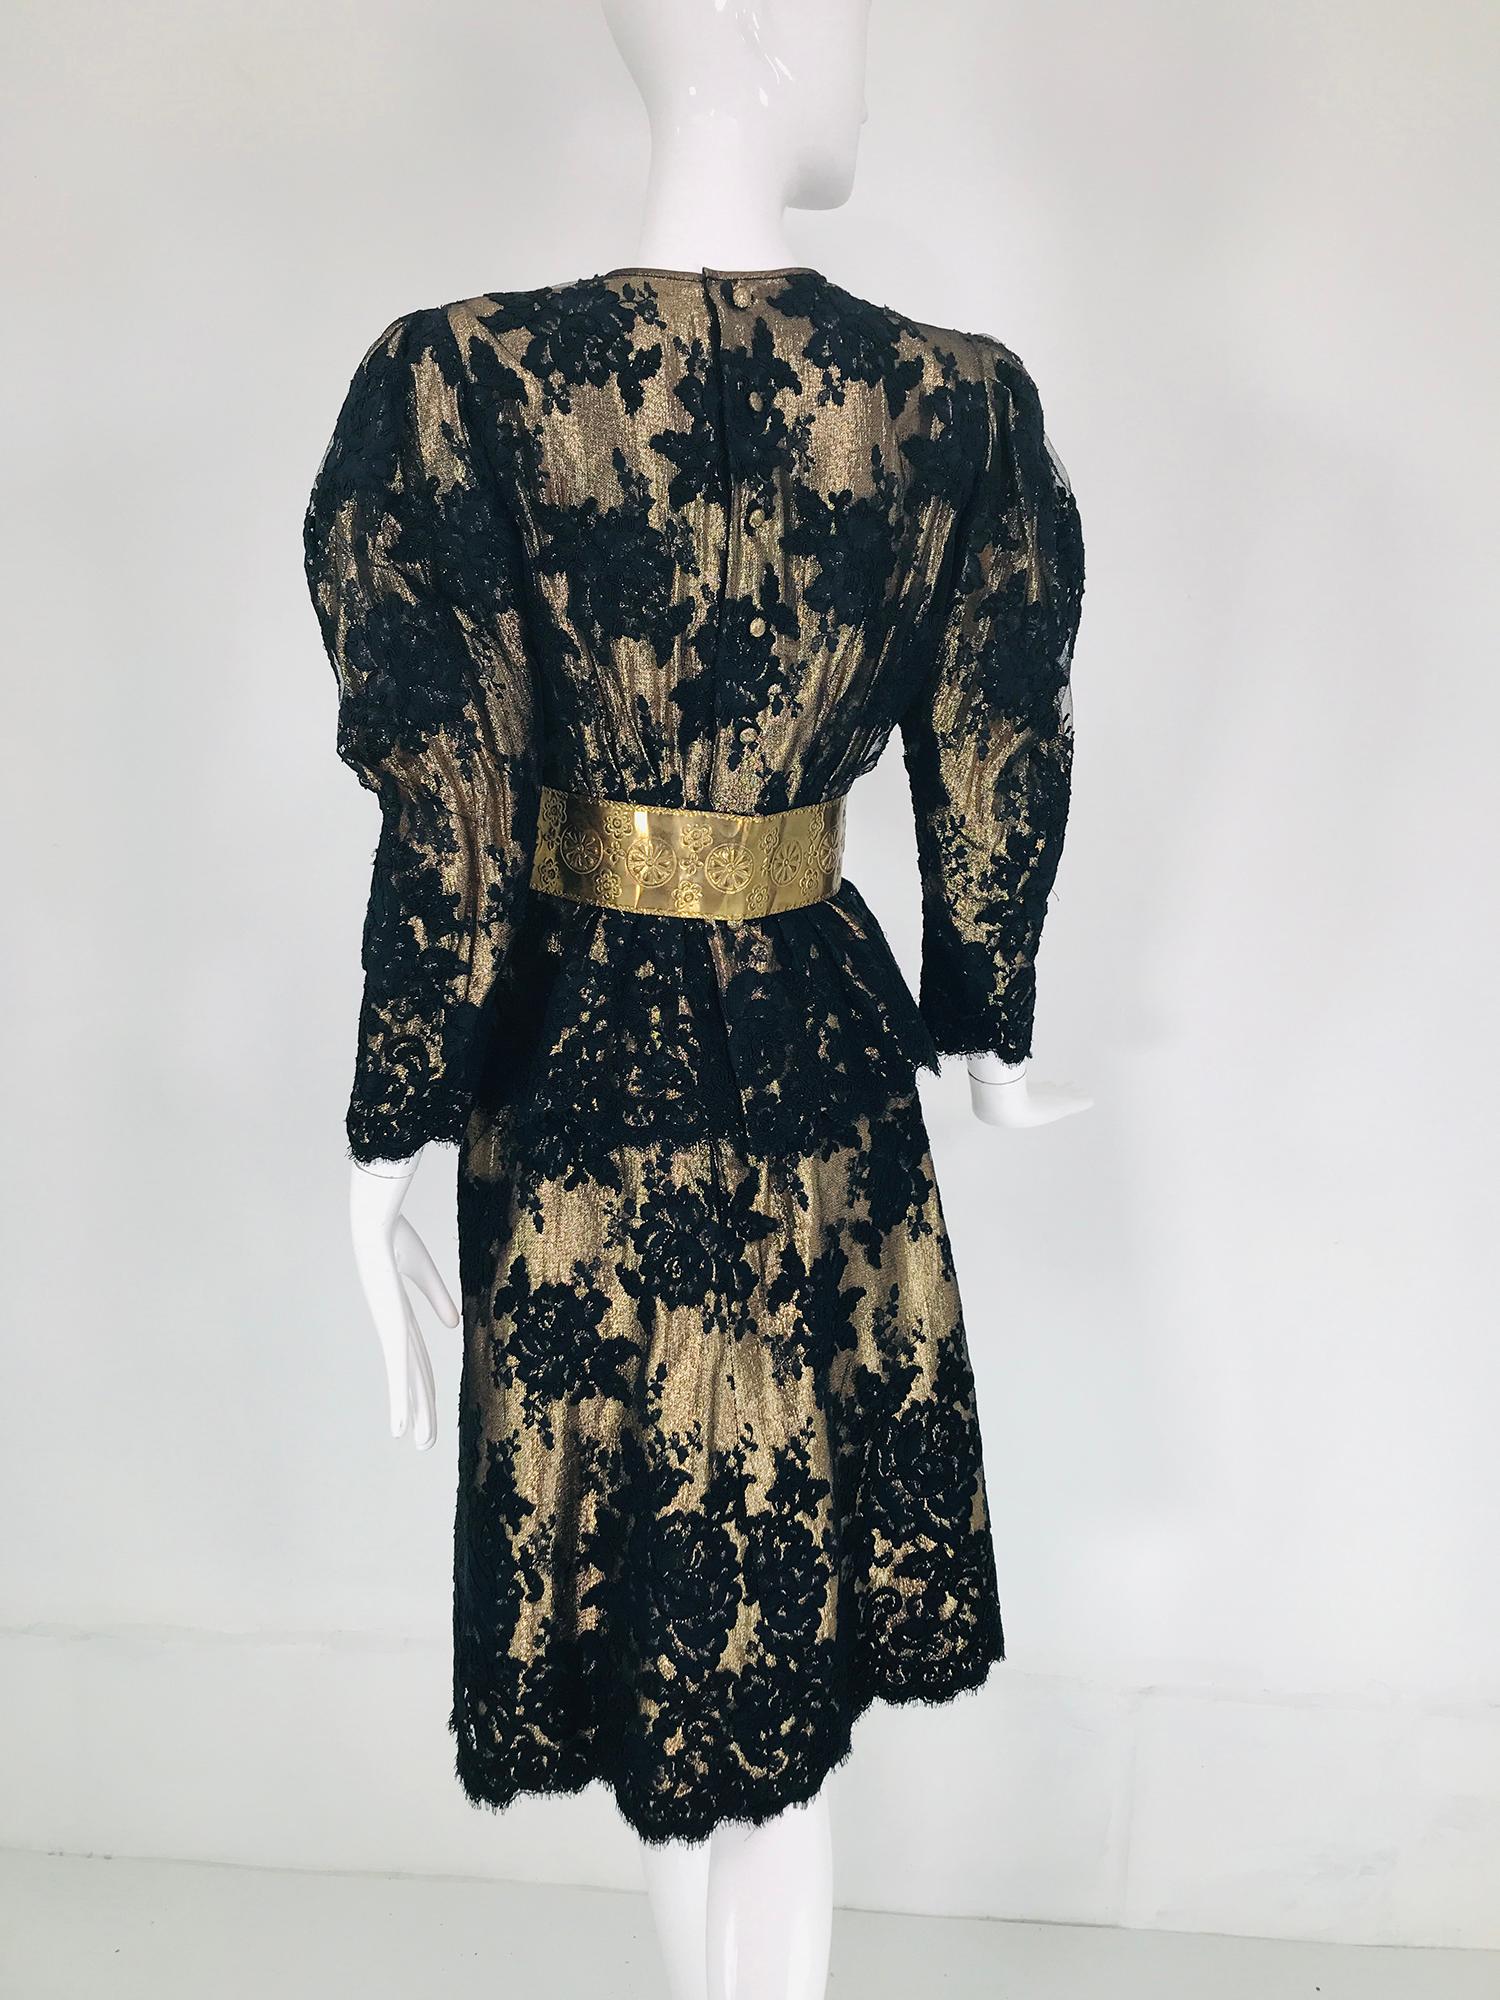 Pauline Trigere Black Guipure Lace over Gold Lame 1980s 2pc Skirt Set  For Sale 2